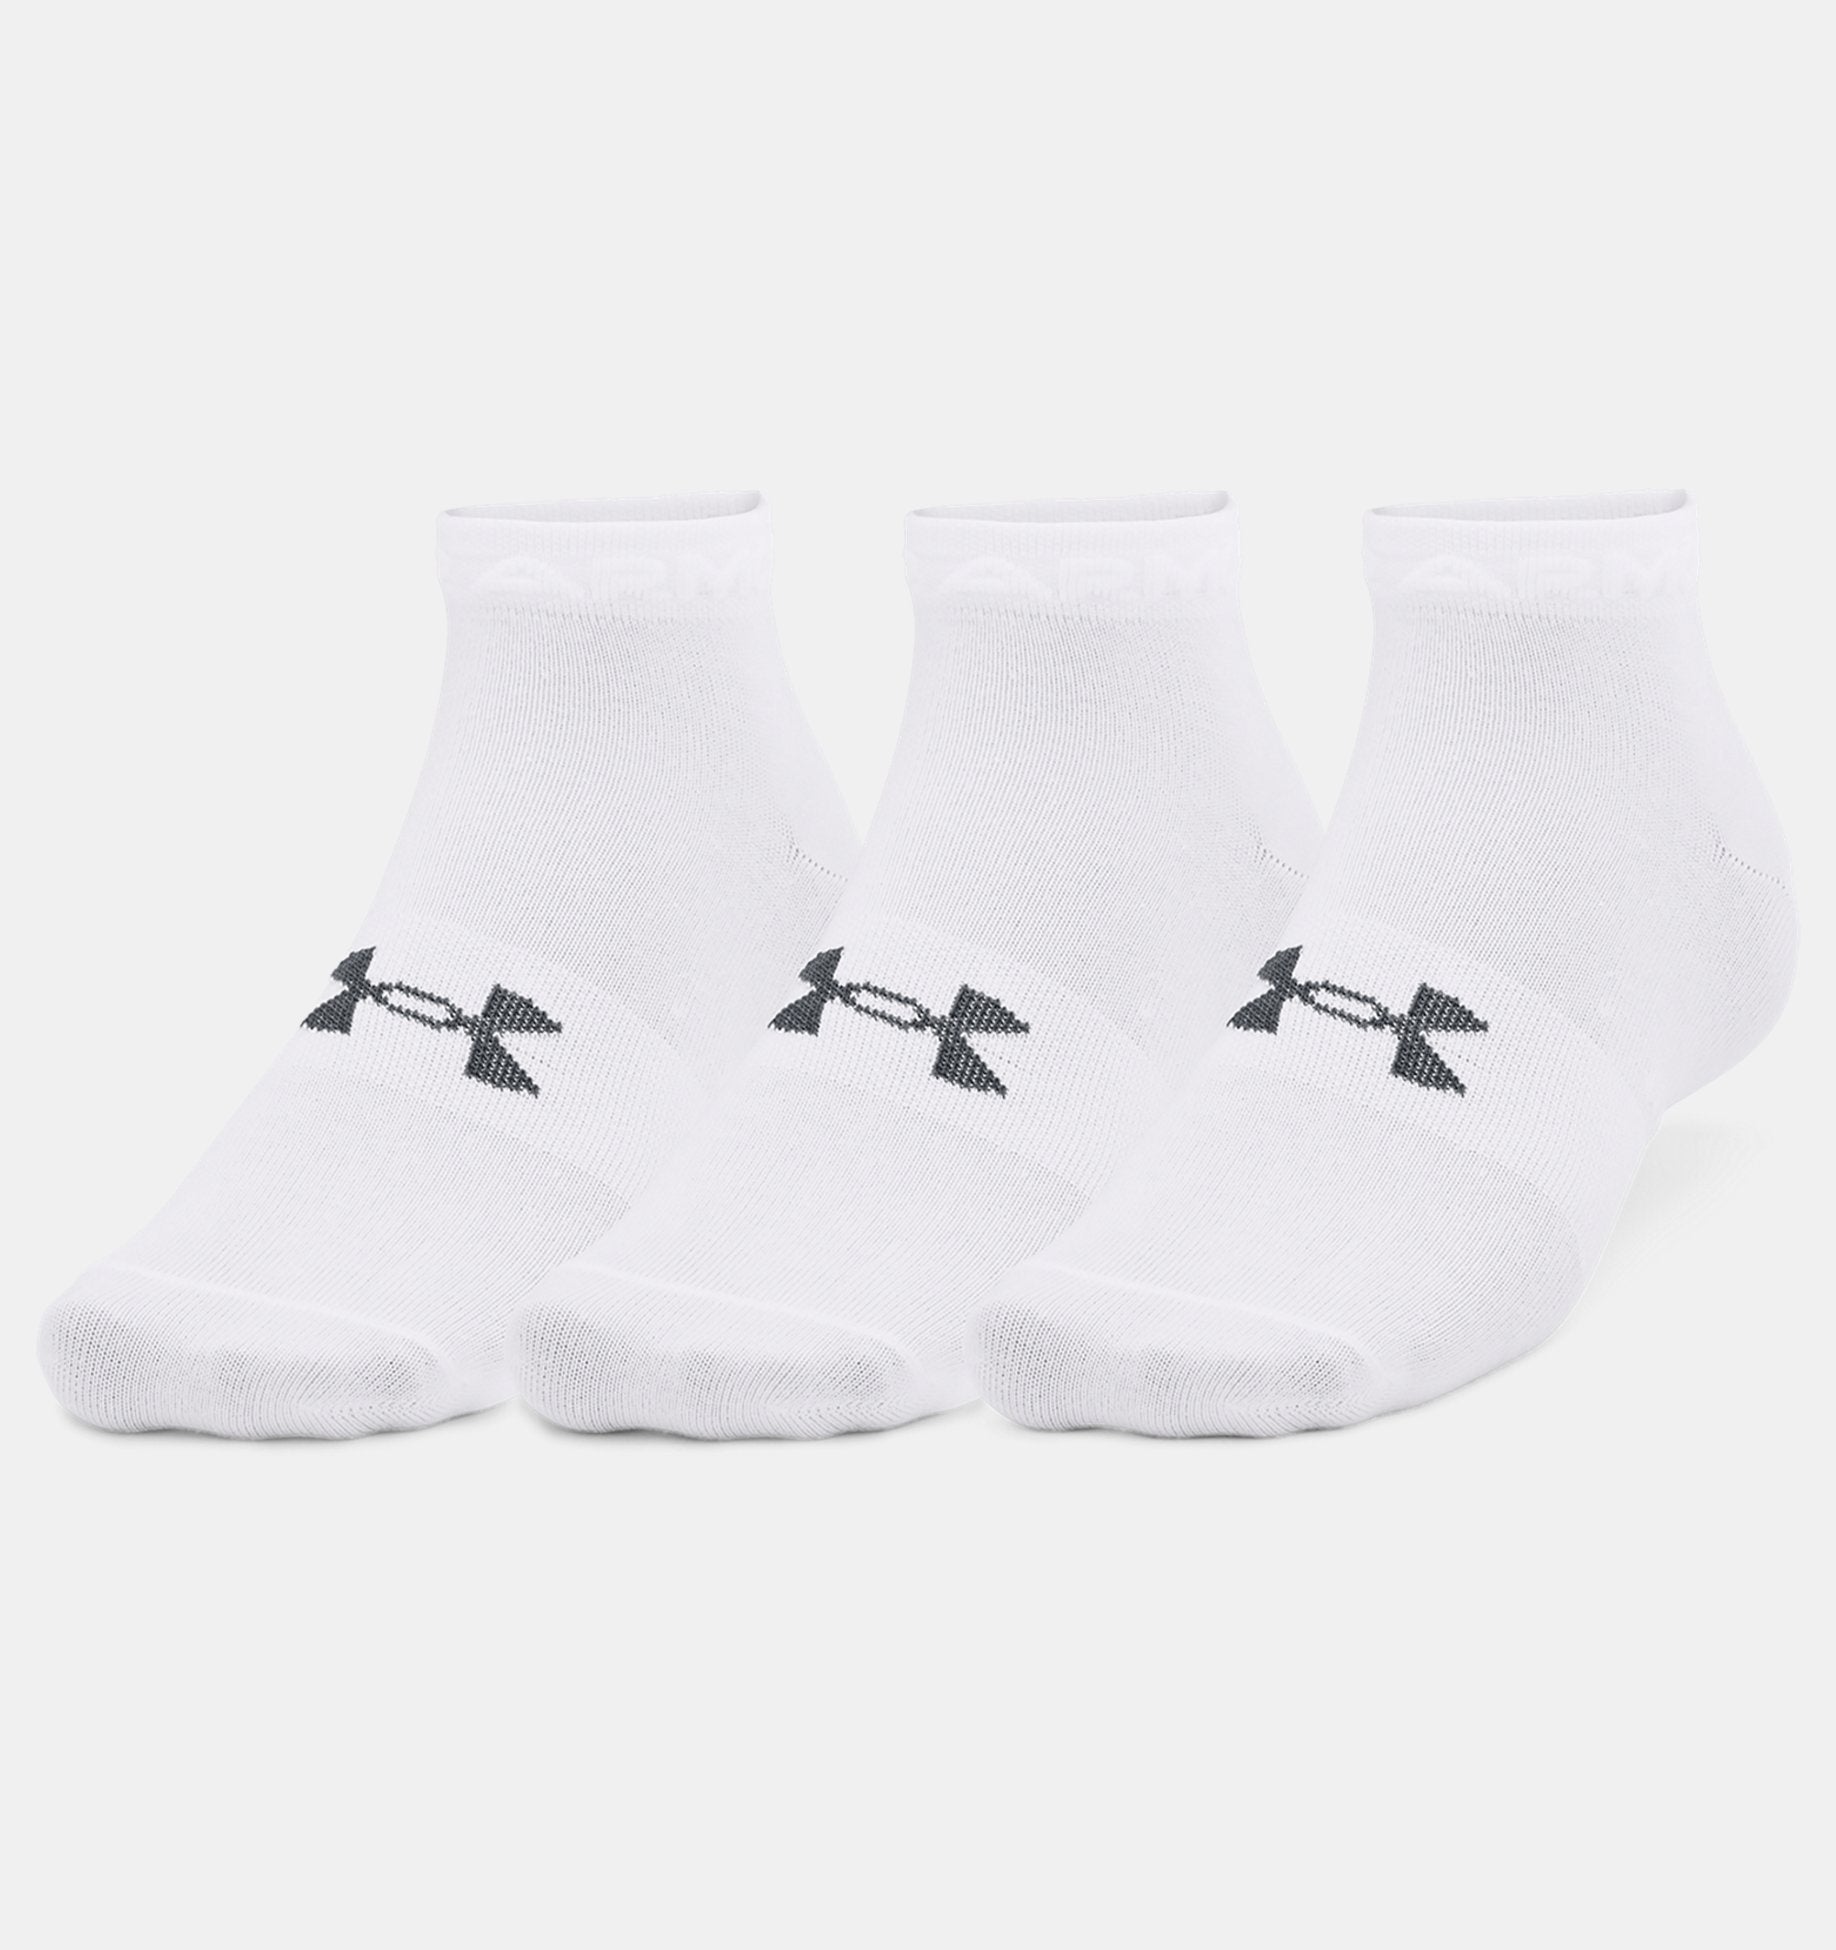 UAA-Y10 (Under armour unisex essentials low cut 3 pack white/pitch gray) 102391304